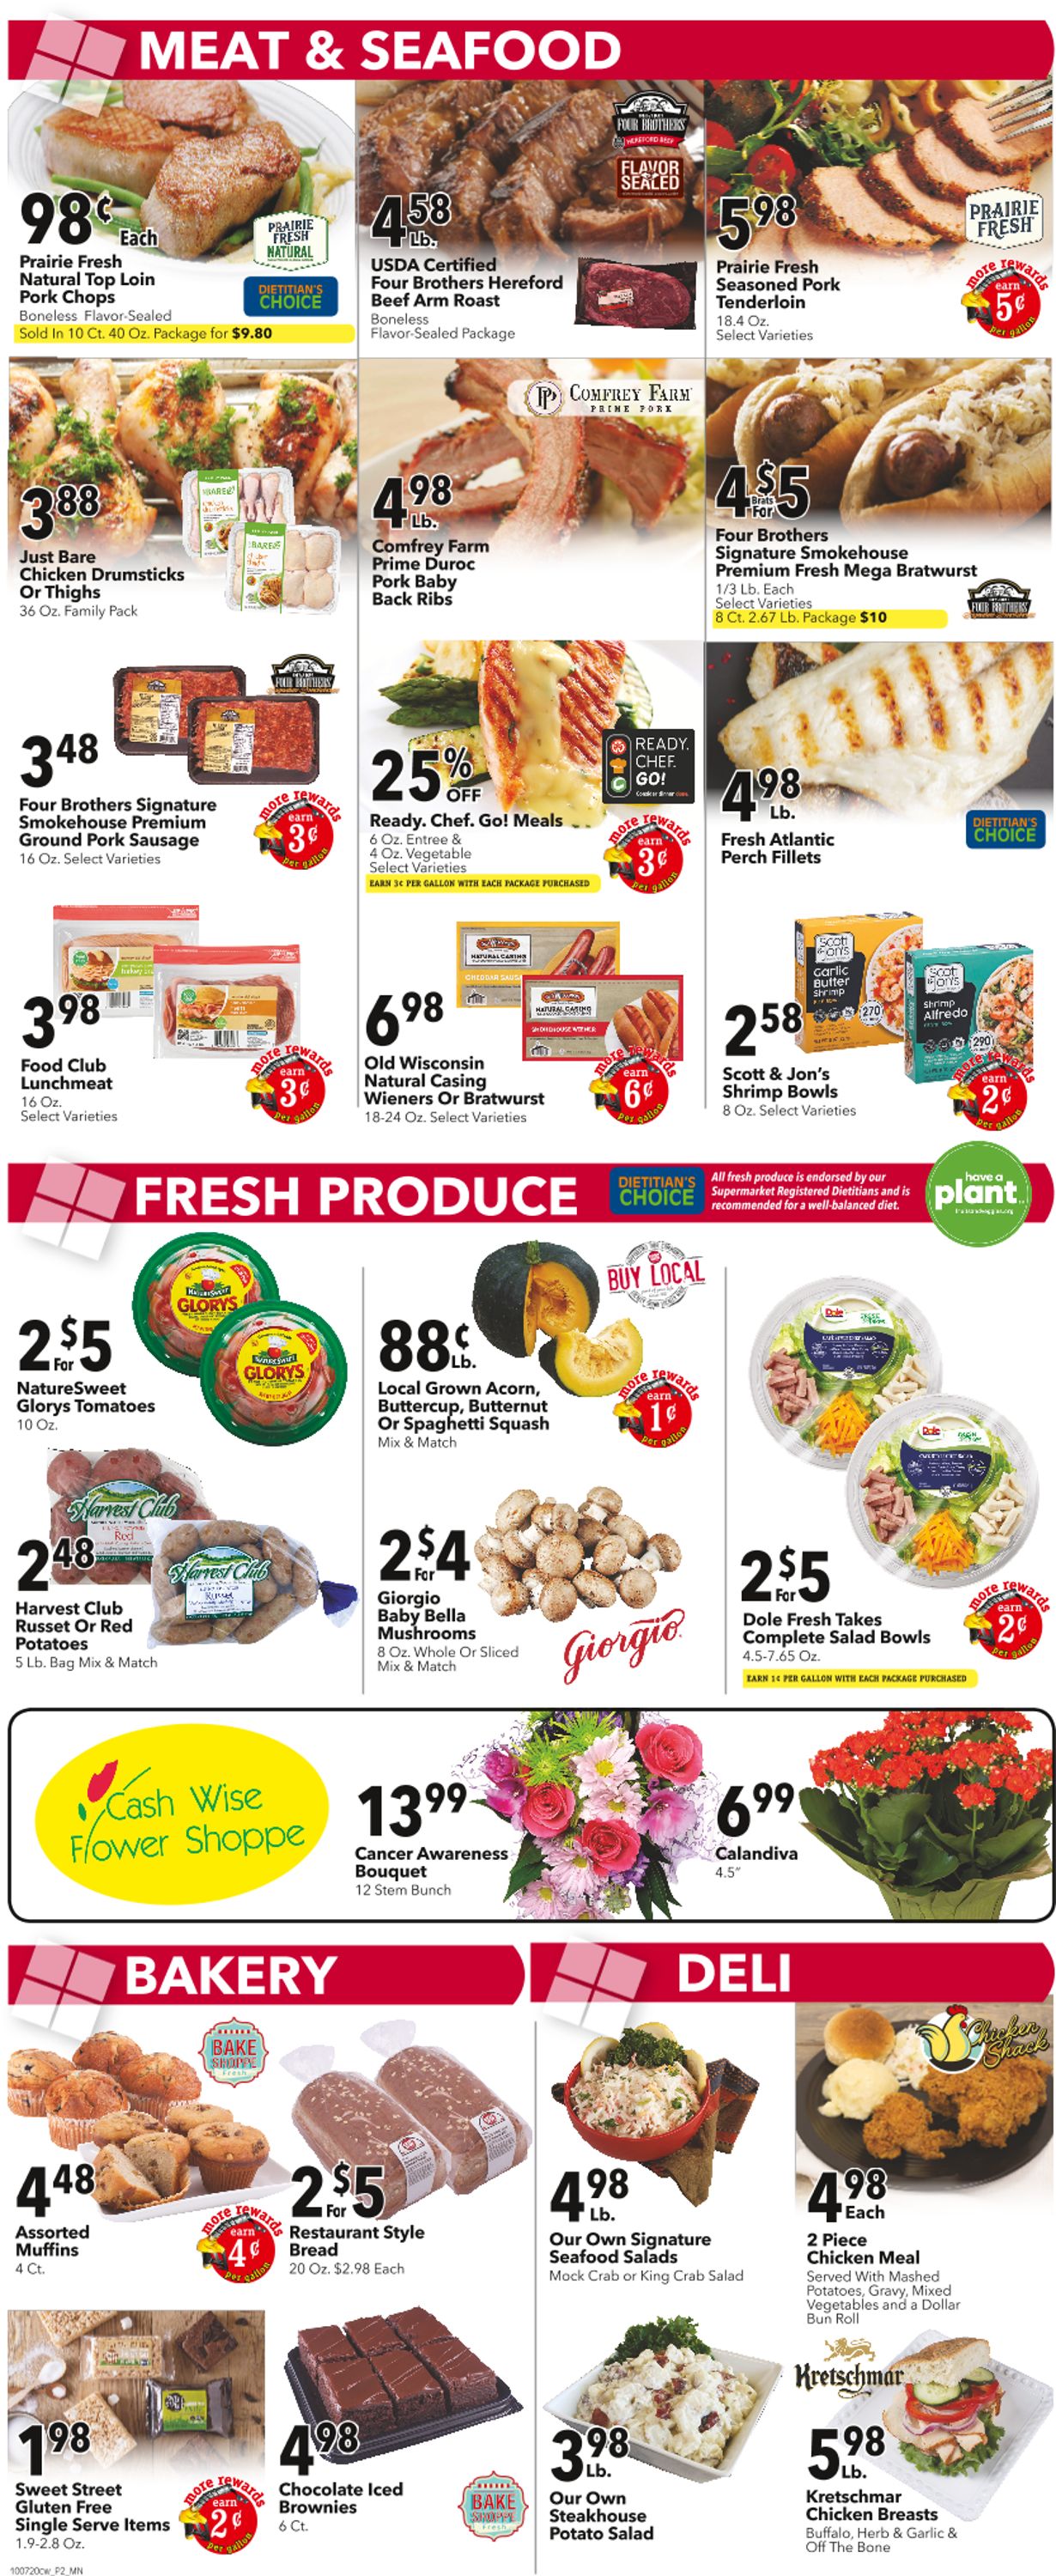 Cash Wise Weekly Ad Circular - valid 10/07-10/13/2020 (Page 2)